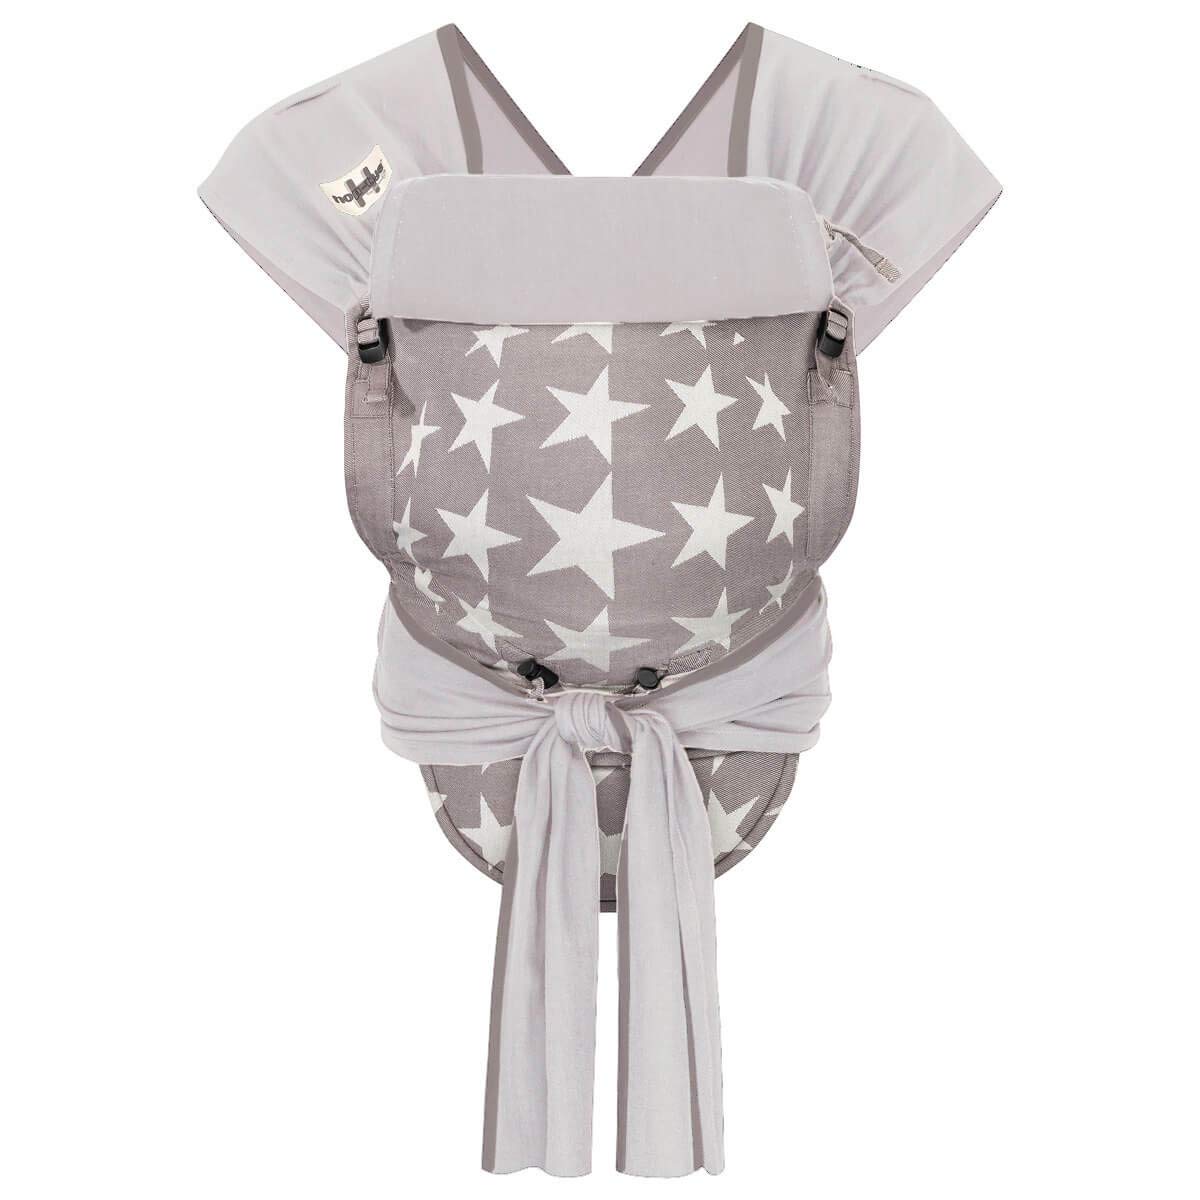 Hoppediz ♥ Hop-Tye Conversion Baby Carrier Made of Fabric I Mei Tai I Belly Carrier & Back Carrier I Includes Binding Instructions, Design Los Angeles Grey